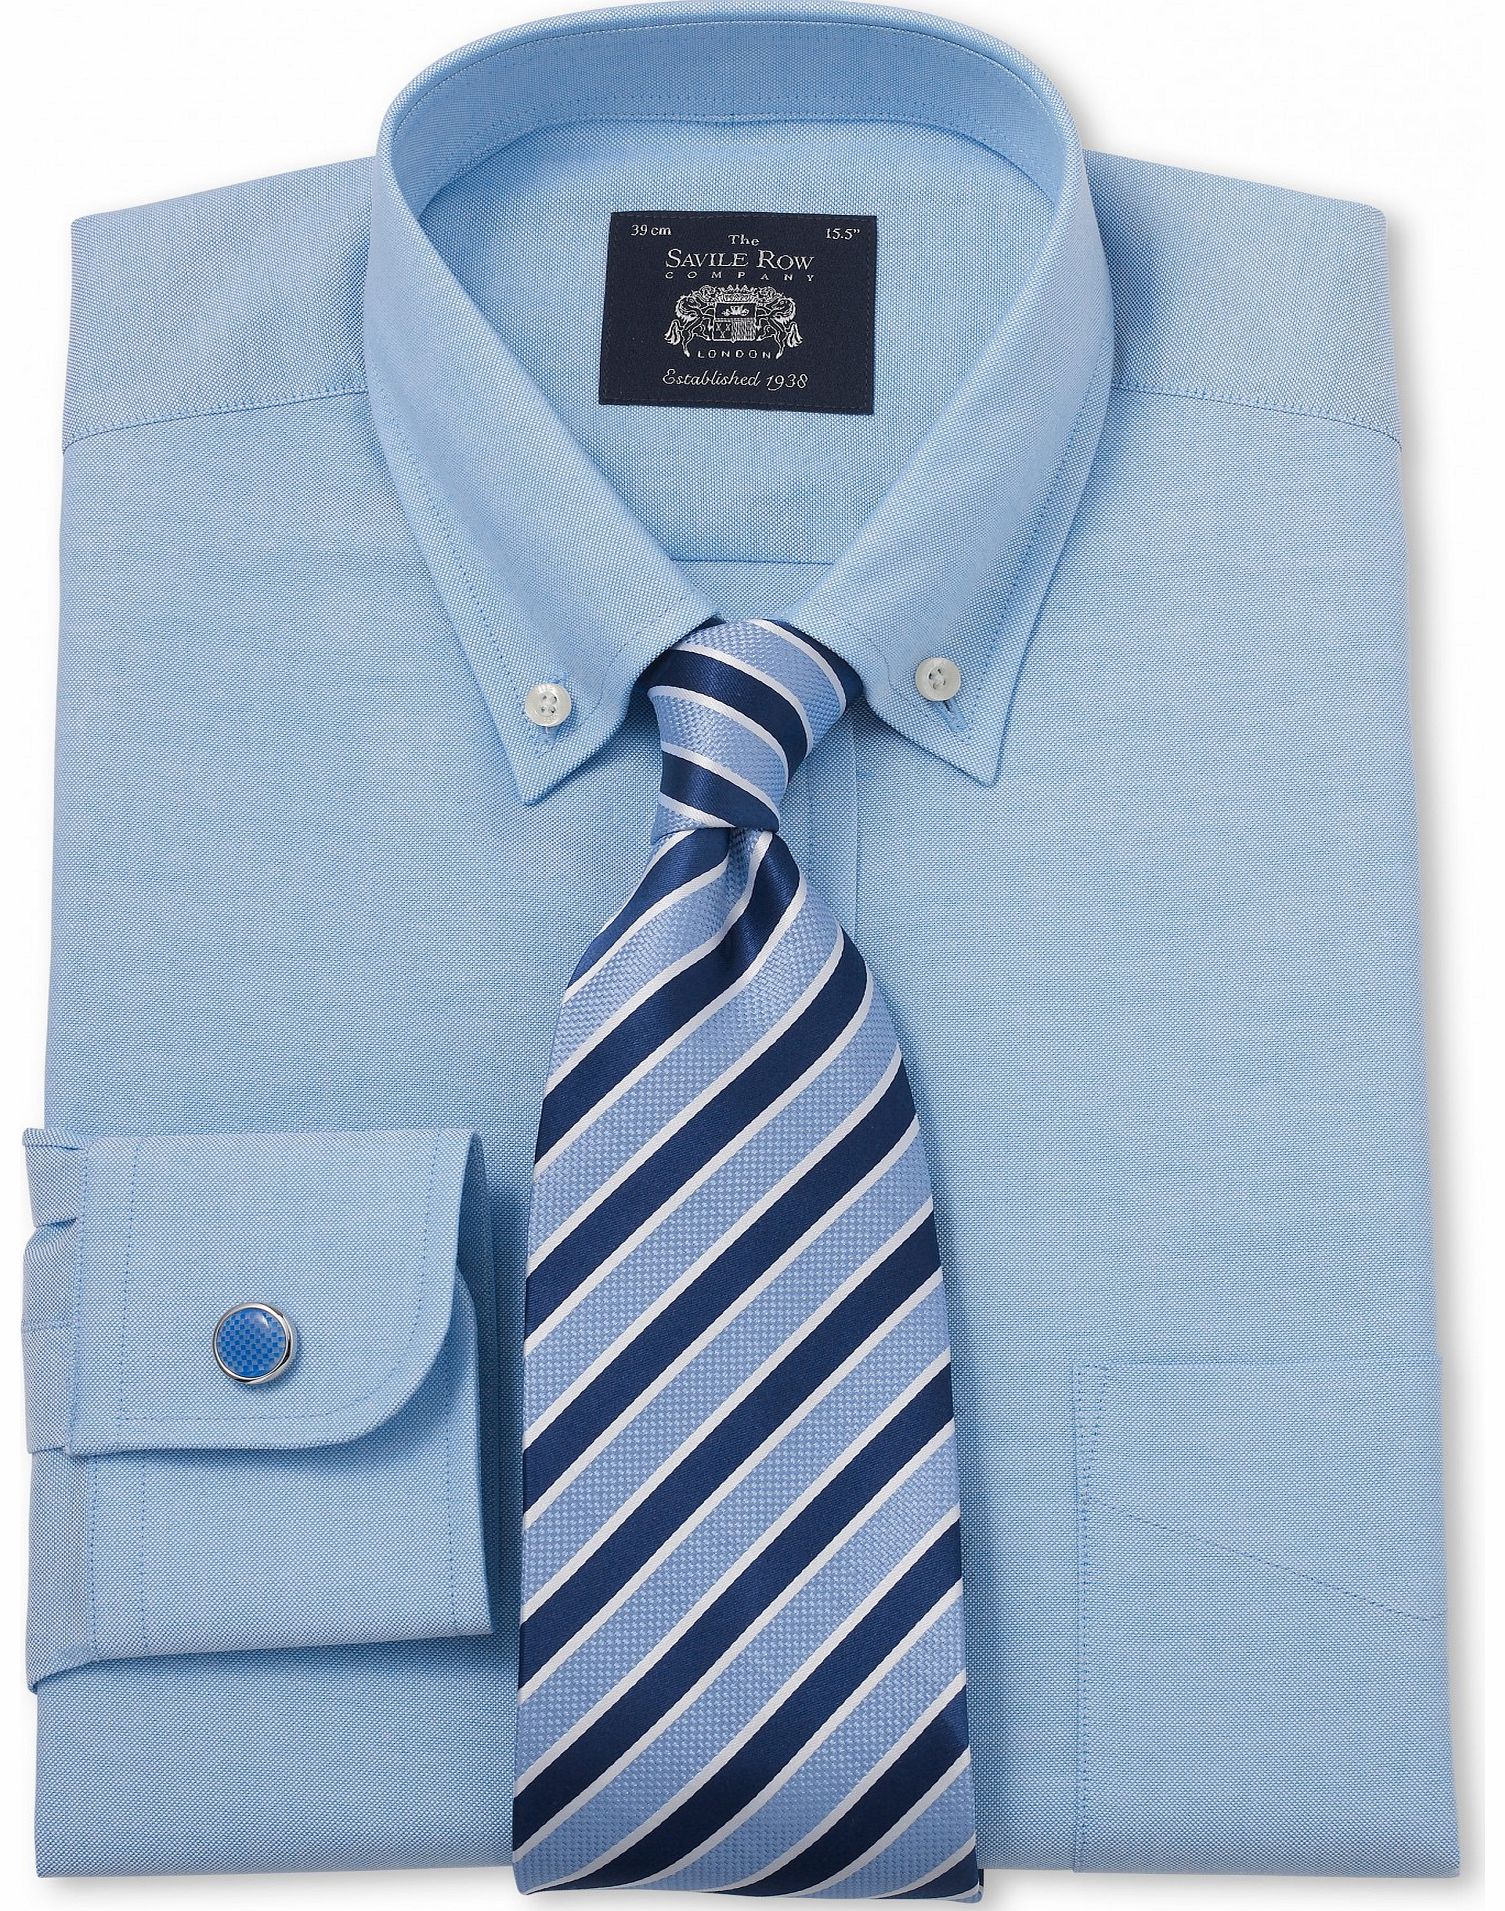 Savile Row Company Blue Pinpoint Classic Fit Shirt 15 1/2``